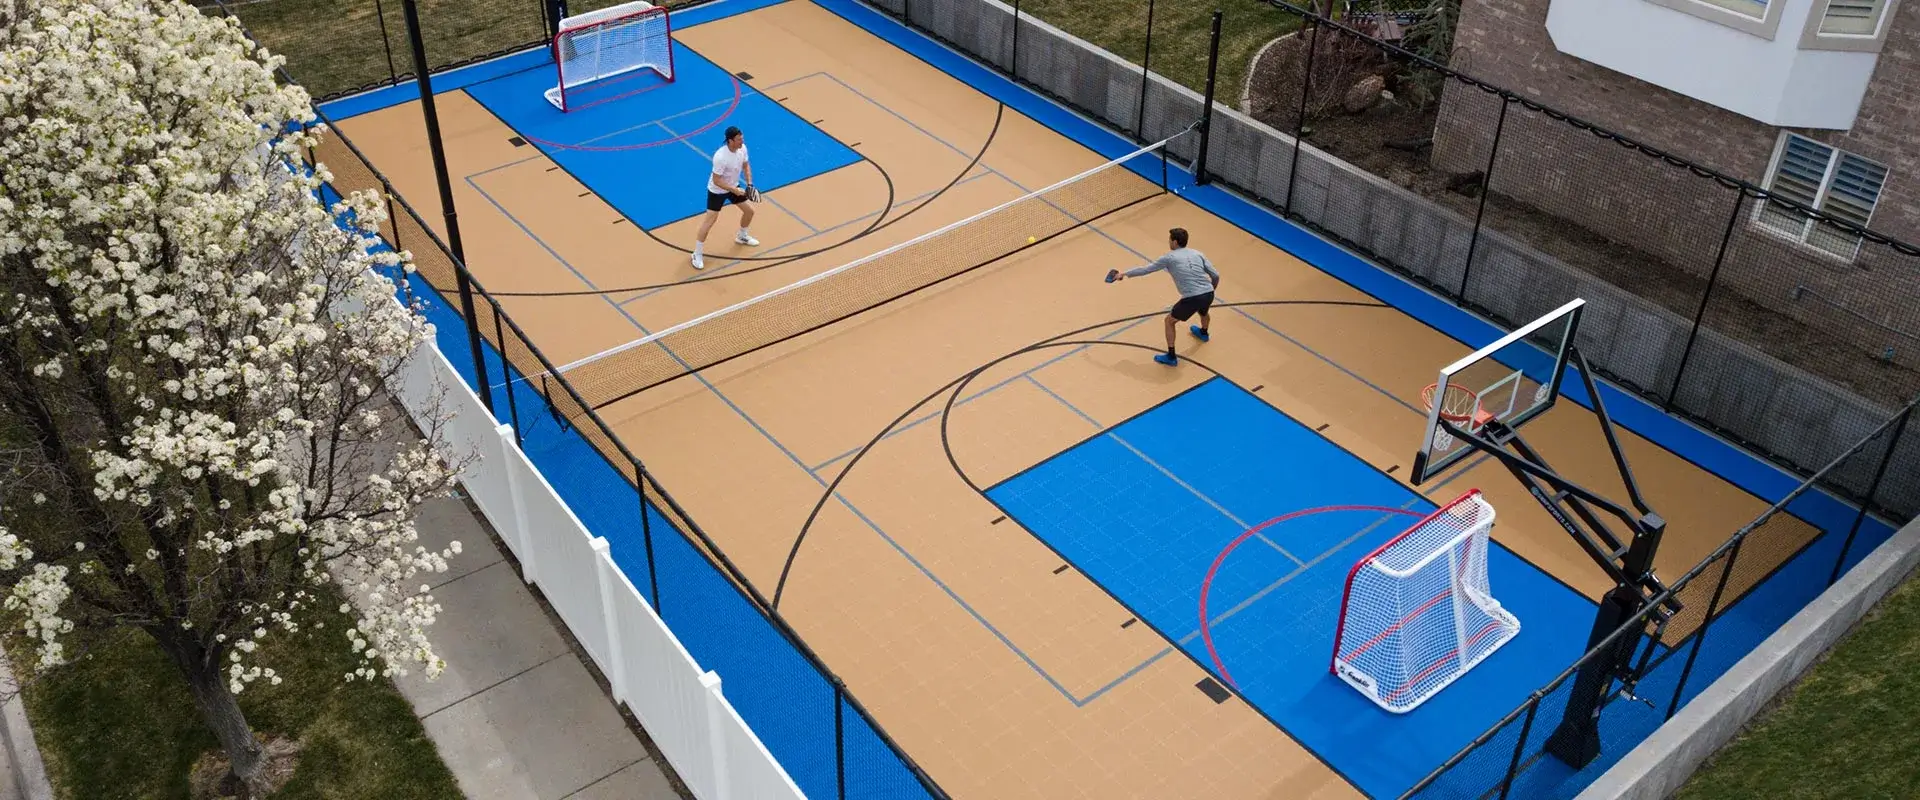 A game of pickleball being played in a backyard